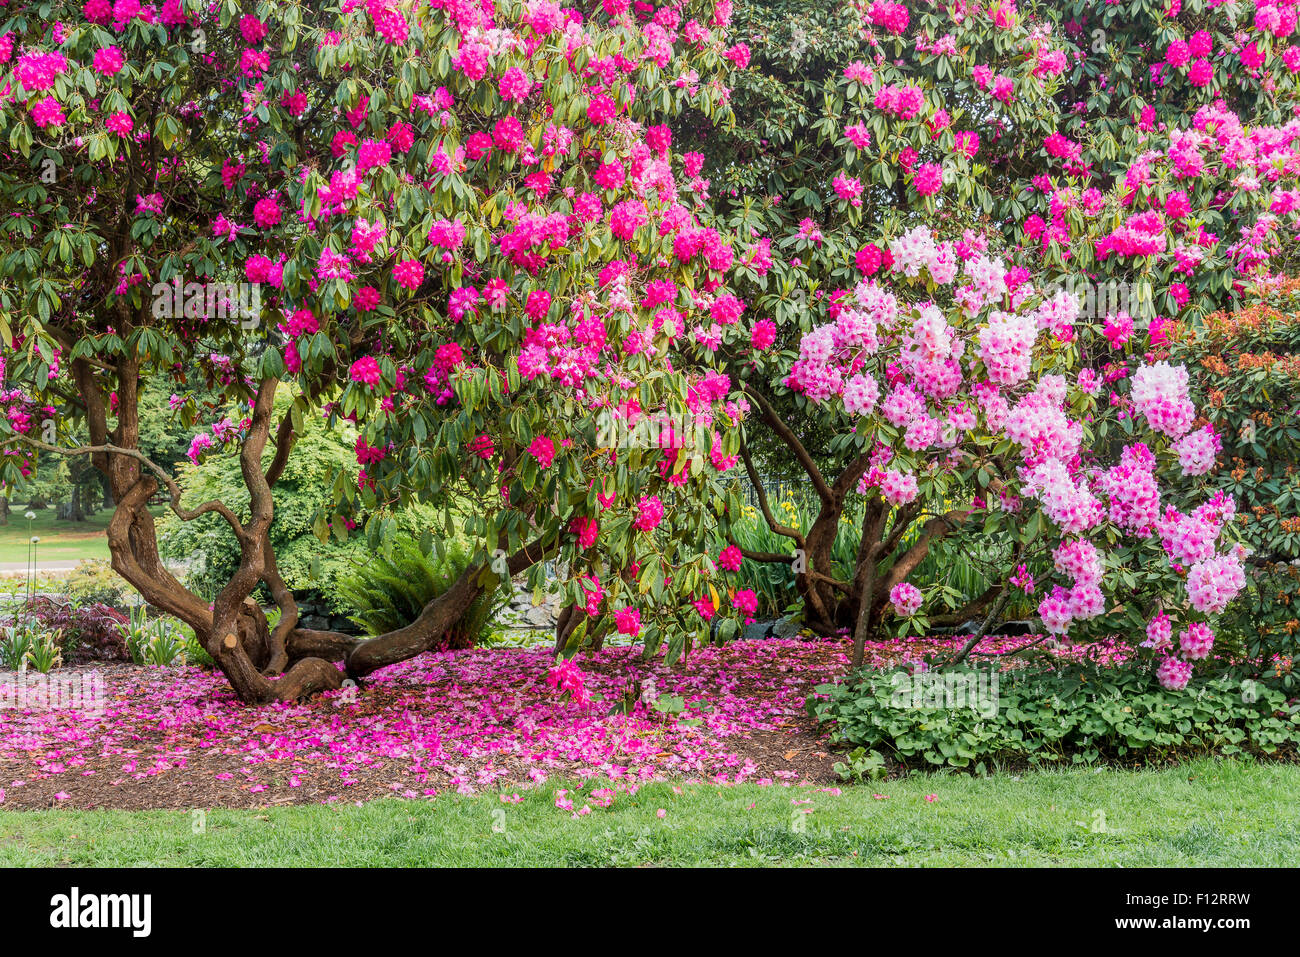 Rhododendrons blooming in Spring, Beacon Hill Park, Victoria, British Columbia, Canada Stock Photo